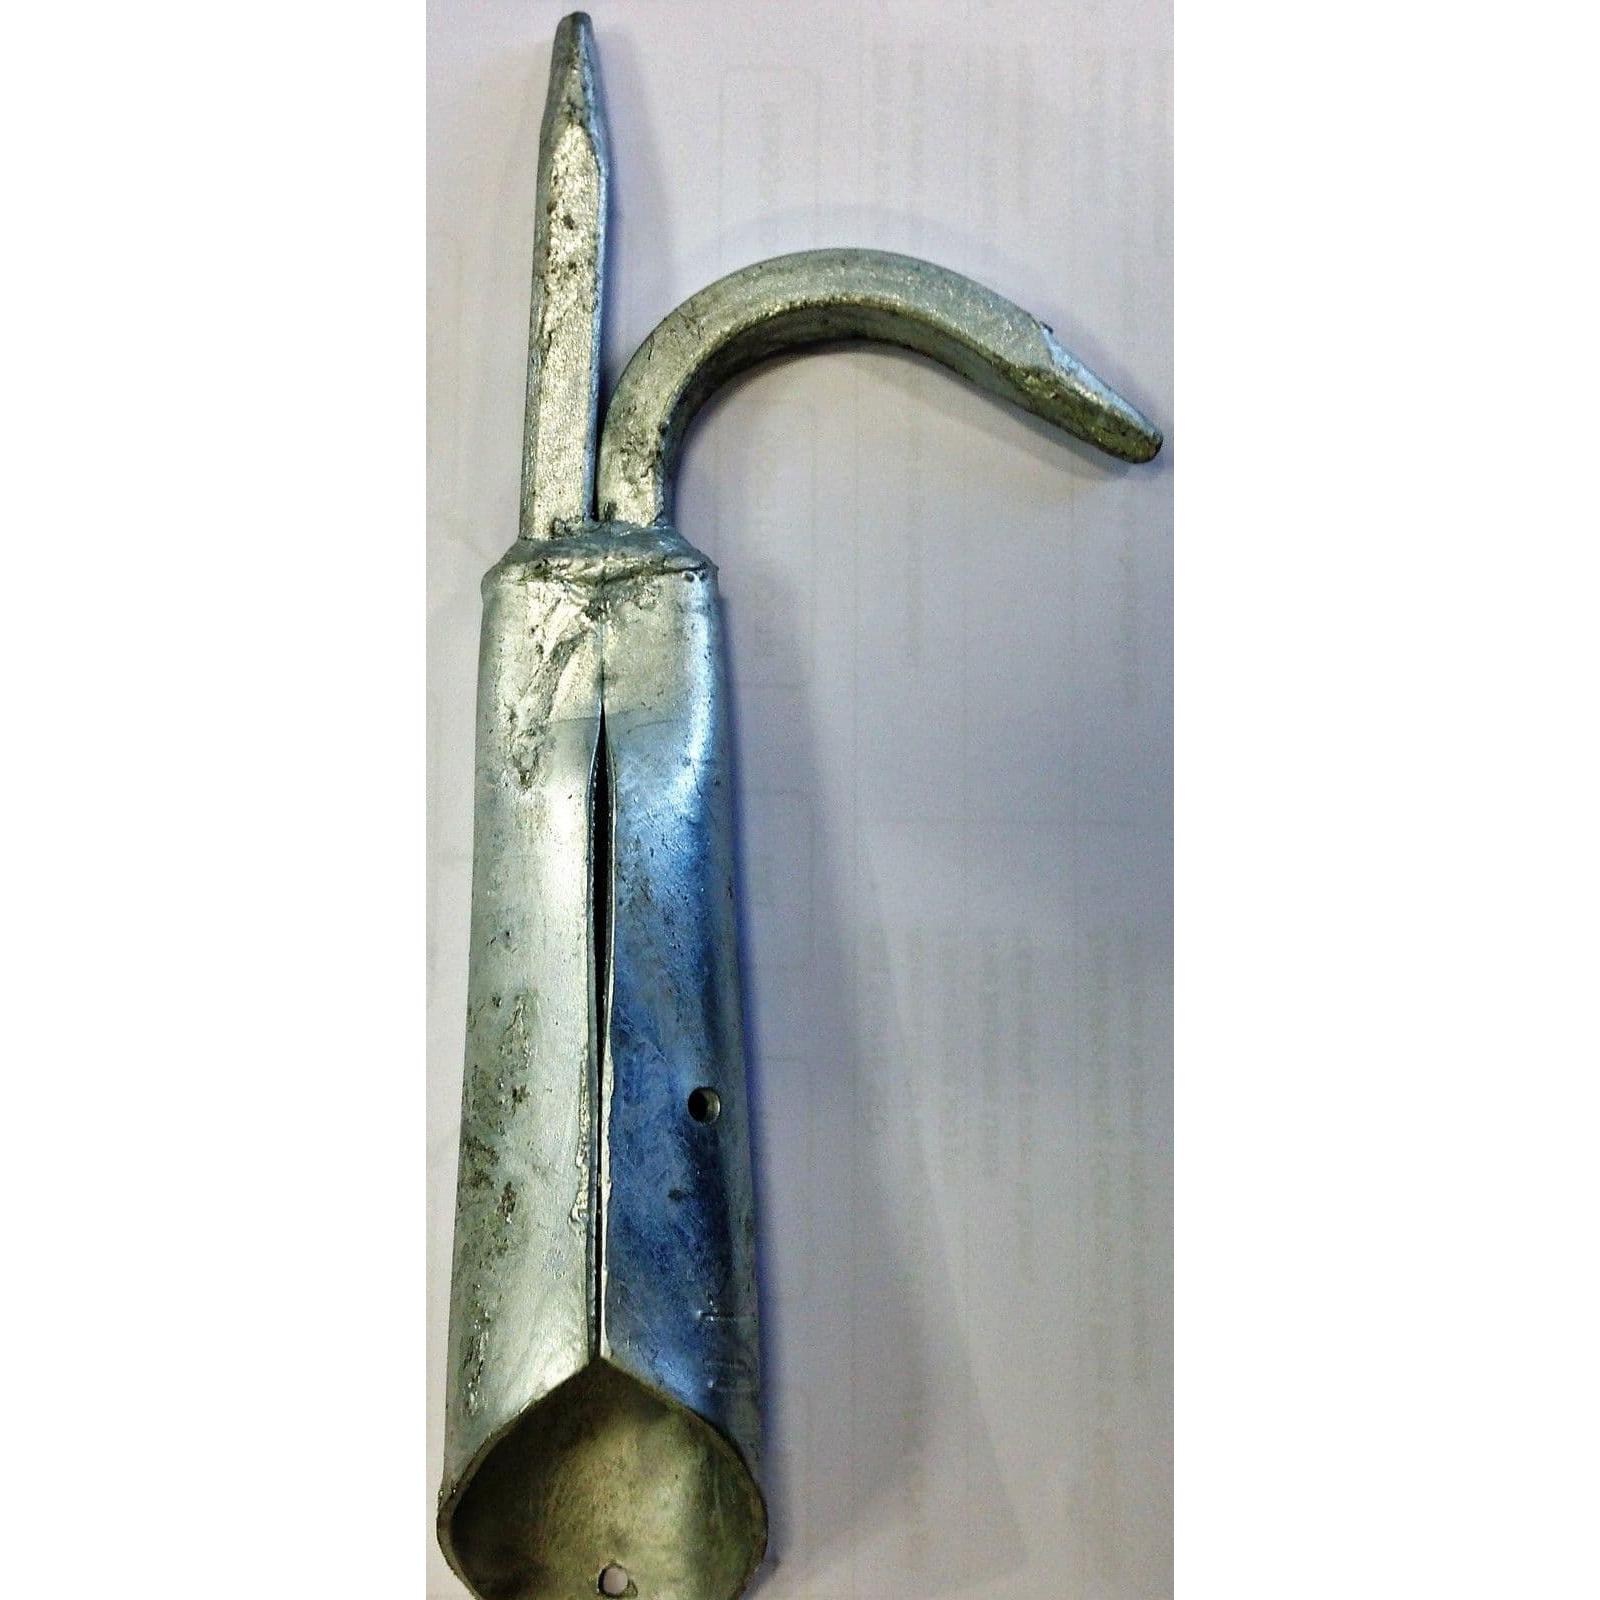 Boat Hook End Spike and Hook Galvanized